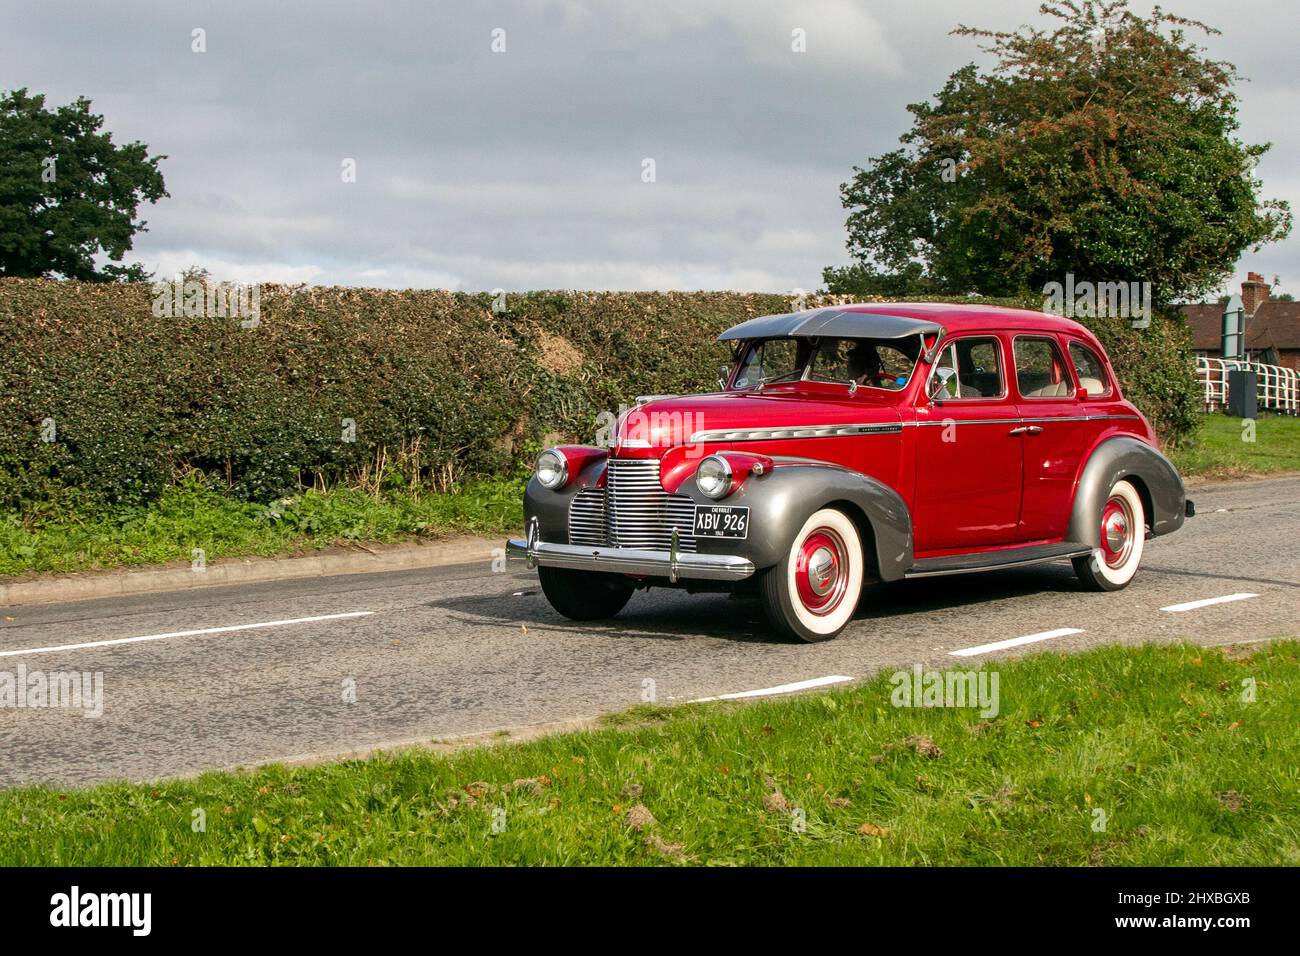 1940 40s pre-war red Chevrolet 3800cc petrol 4dr sedan; en-route to Capesthorne Hall classic August car show, Cheshire, UK Stock Photo